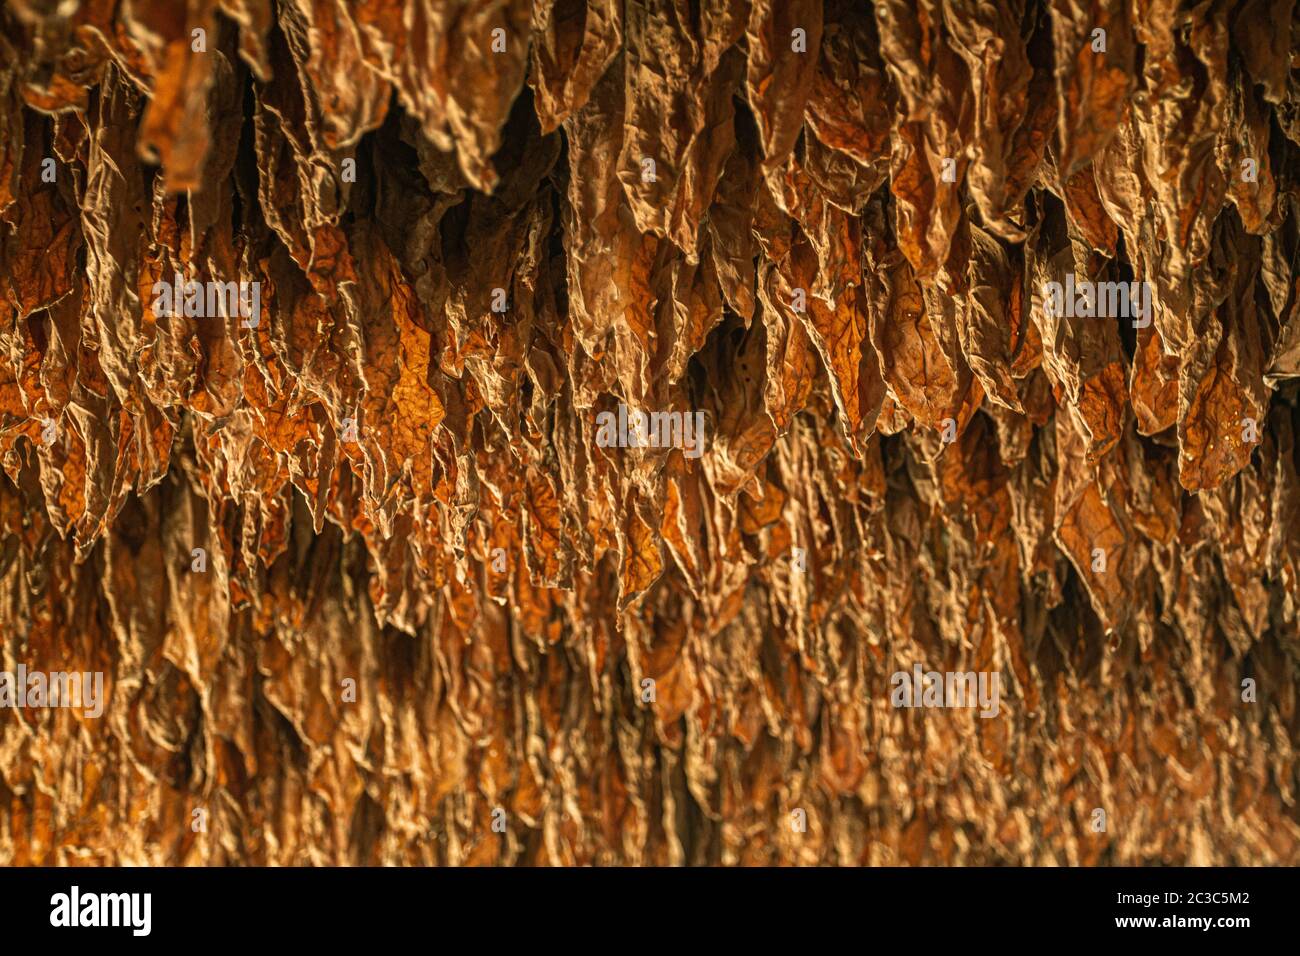 rows of tobacco dry leaves hang in a barn. rural crop traditionally harvested plantation, low angle shot looking up Stock Photo